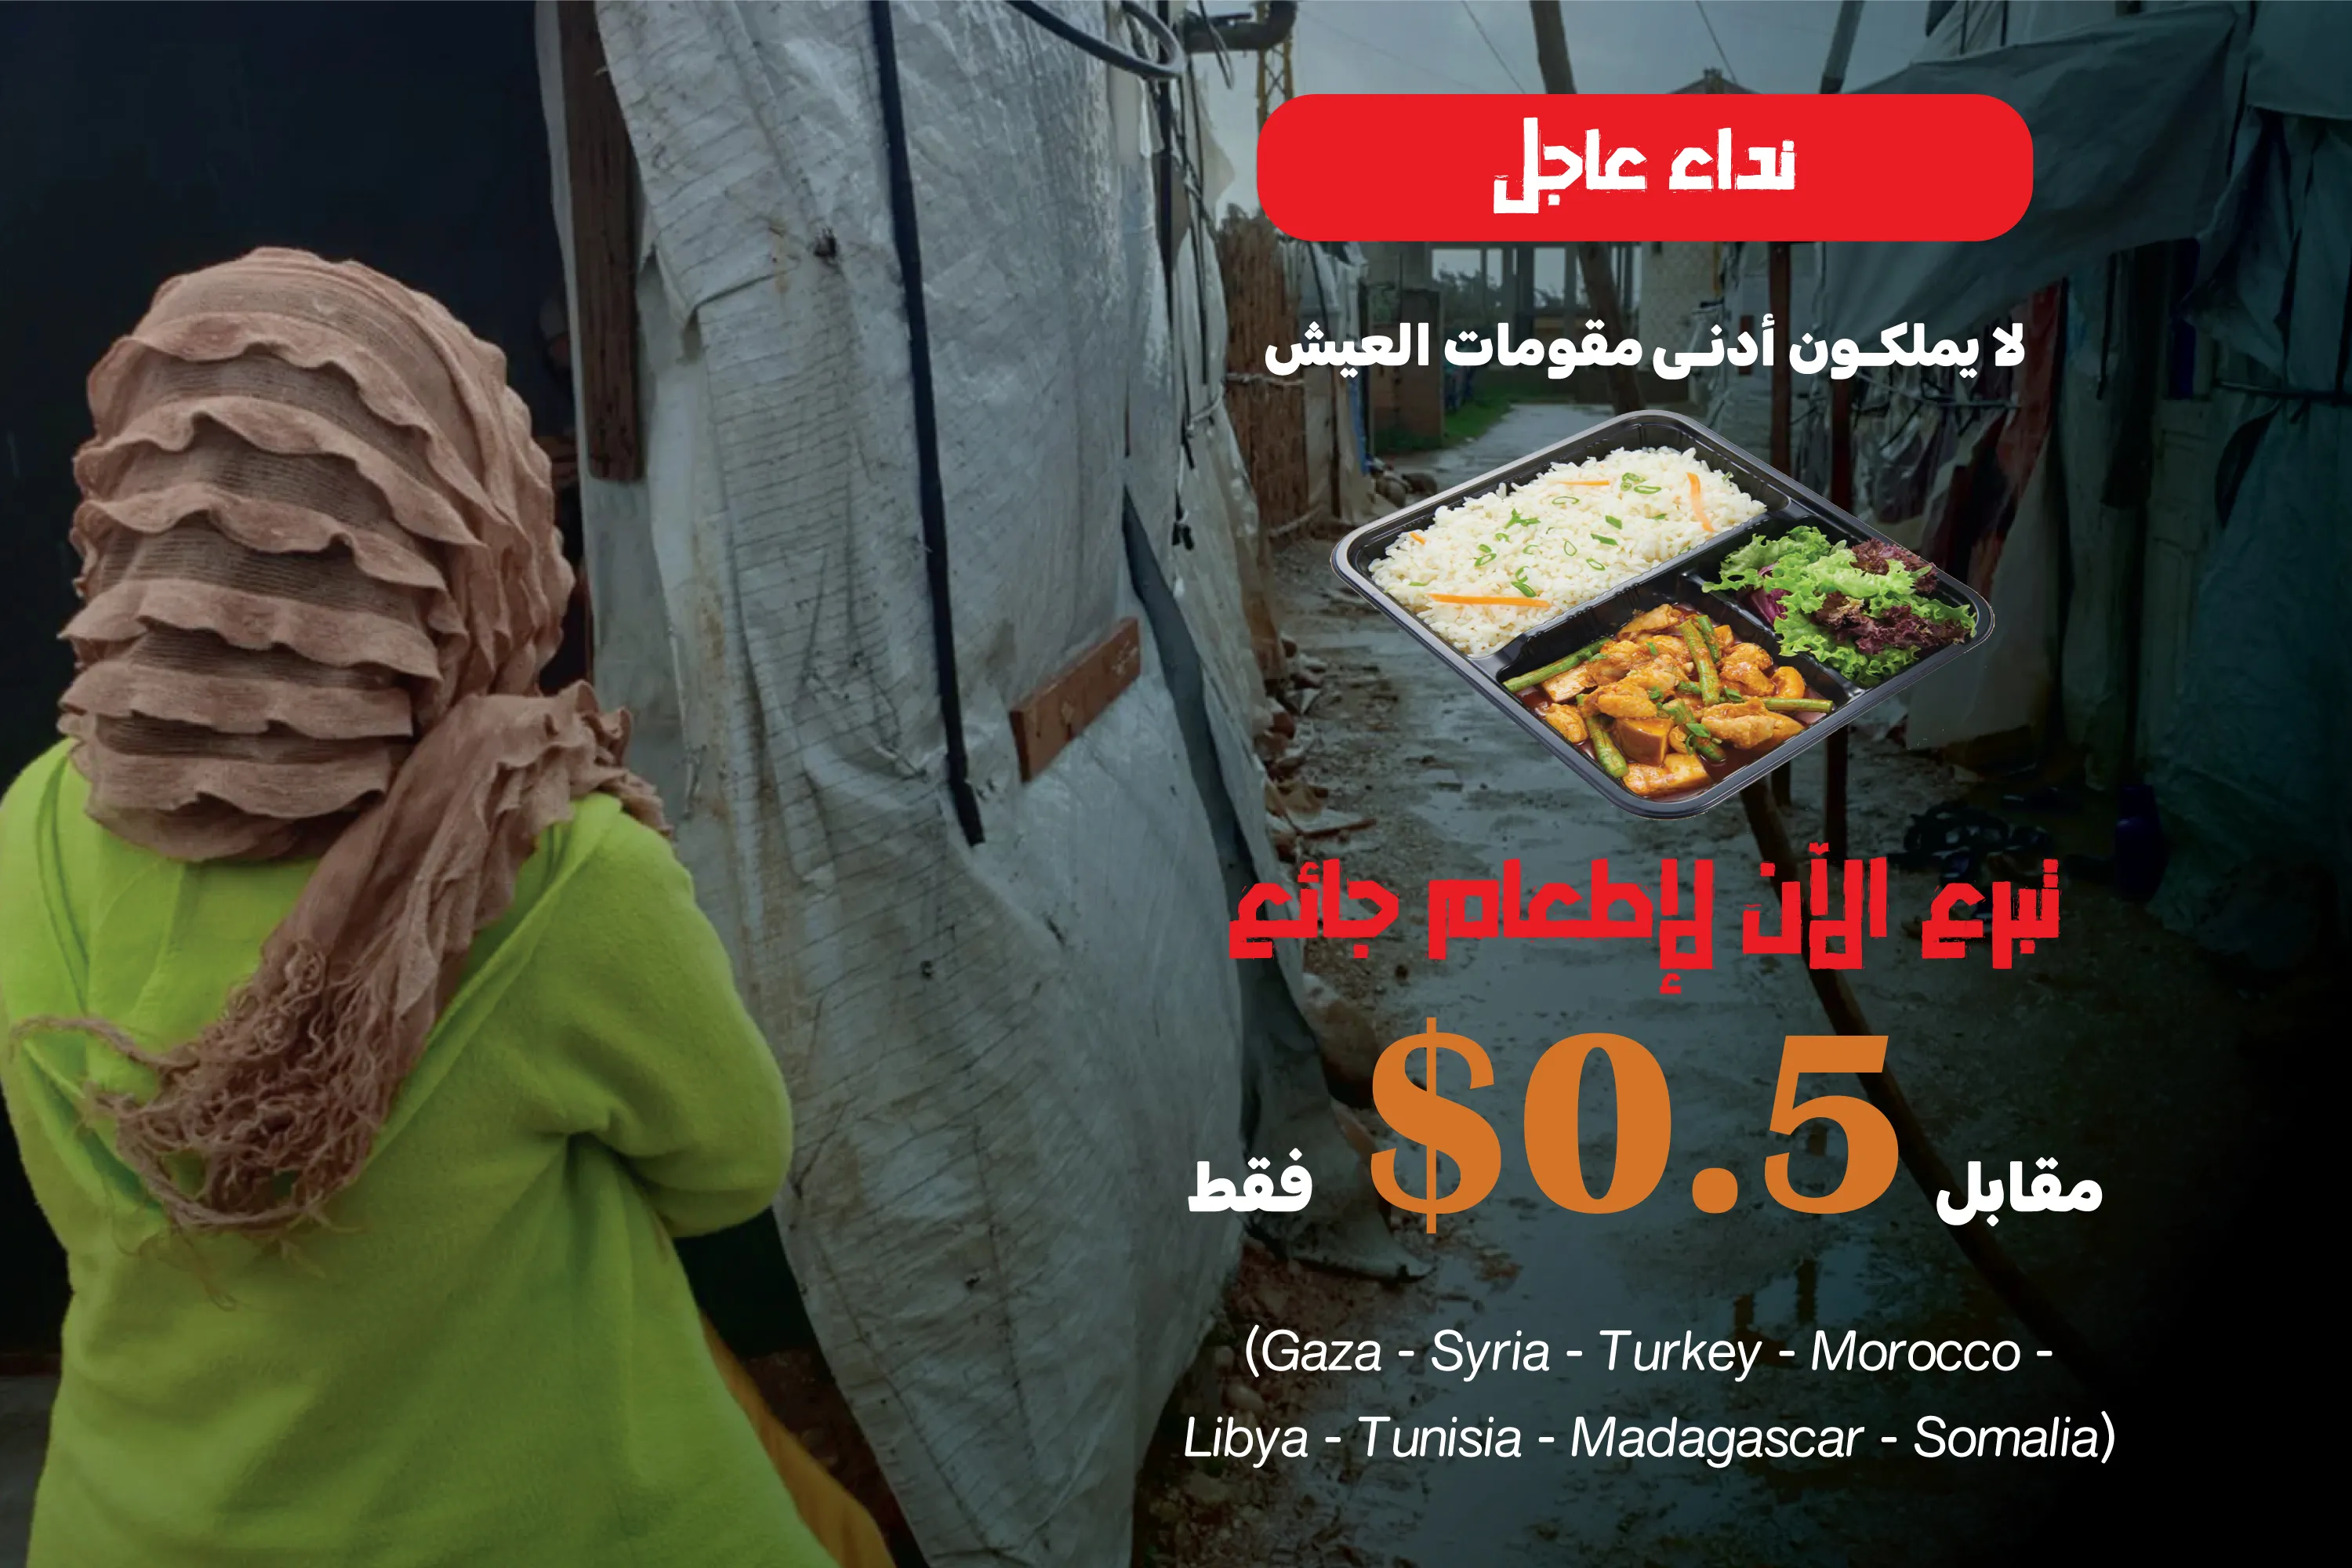 Urgent appeal - Feed the hungry project for $0.5 meal